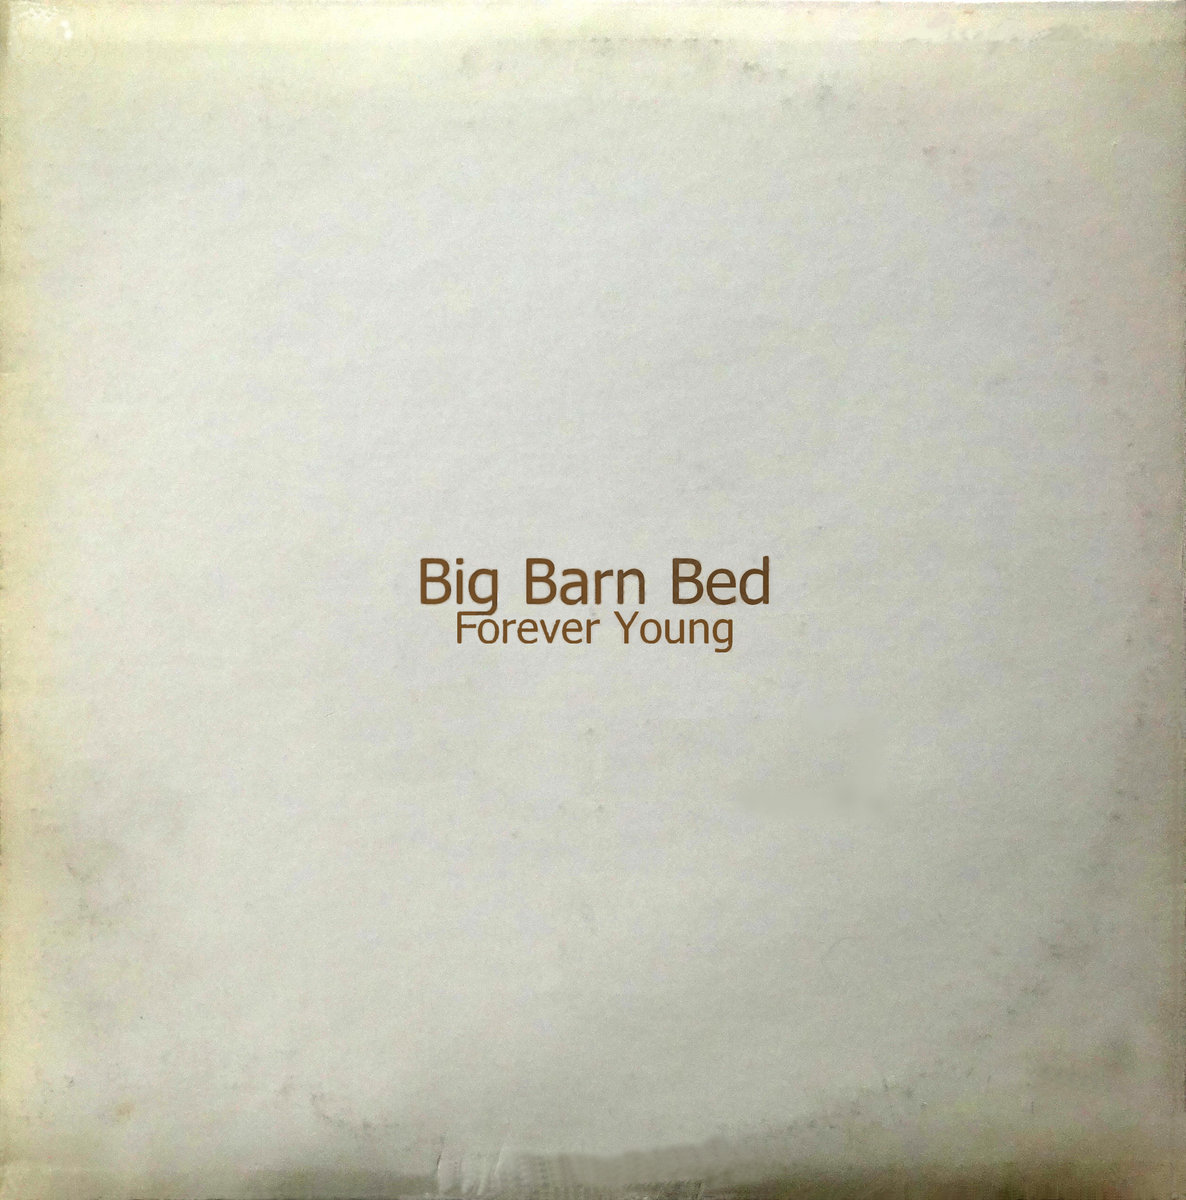 Forever Young Ldp 002 Big Barn Bed Les Disques Pgase